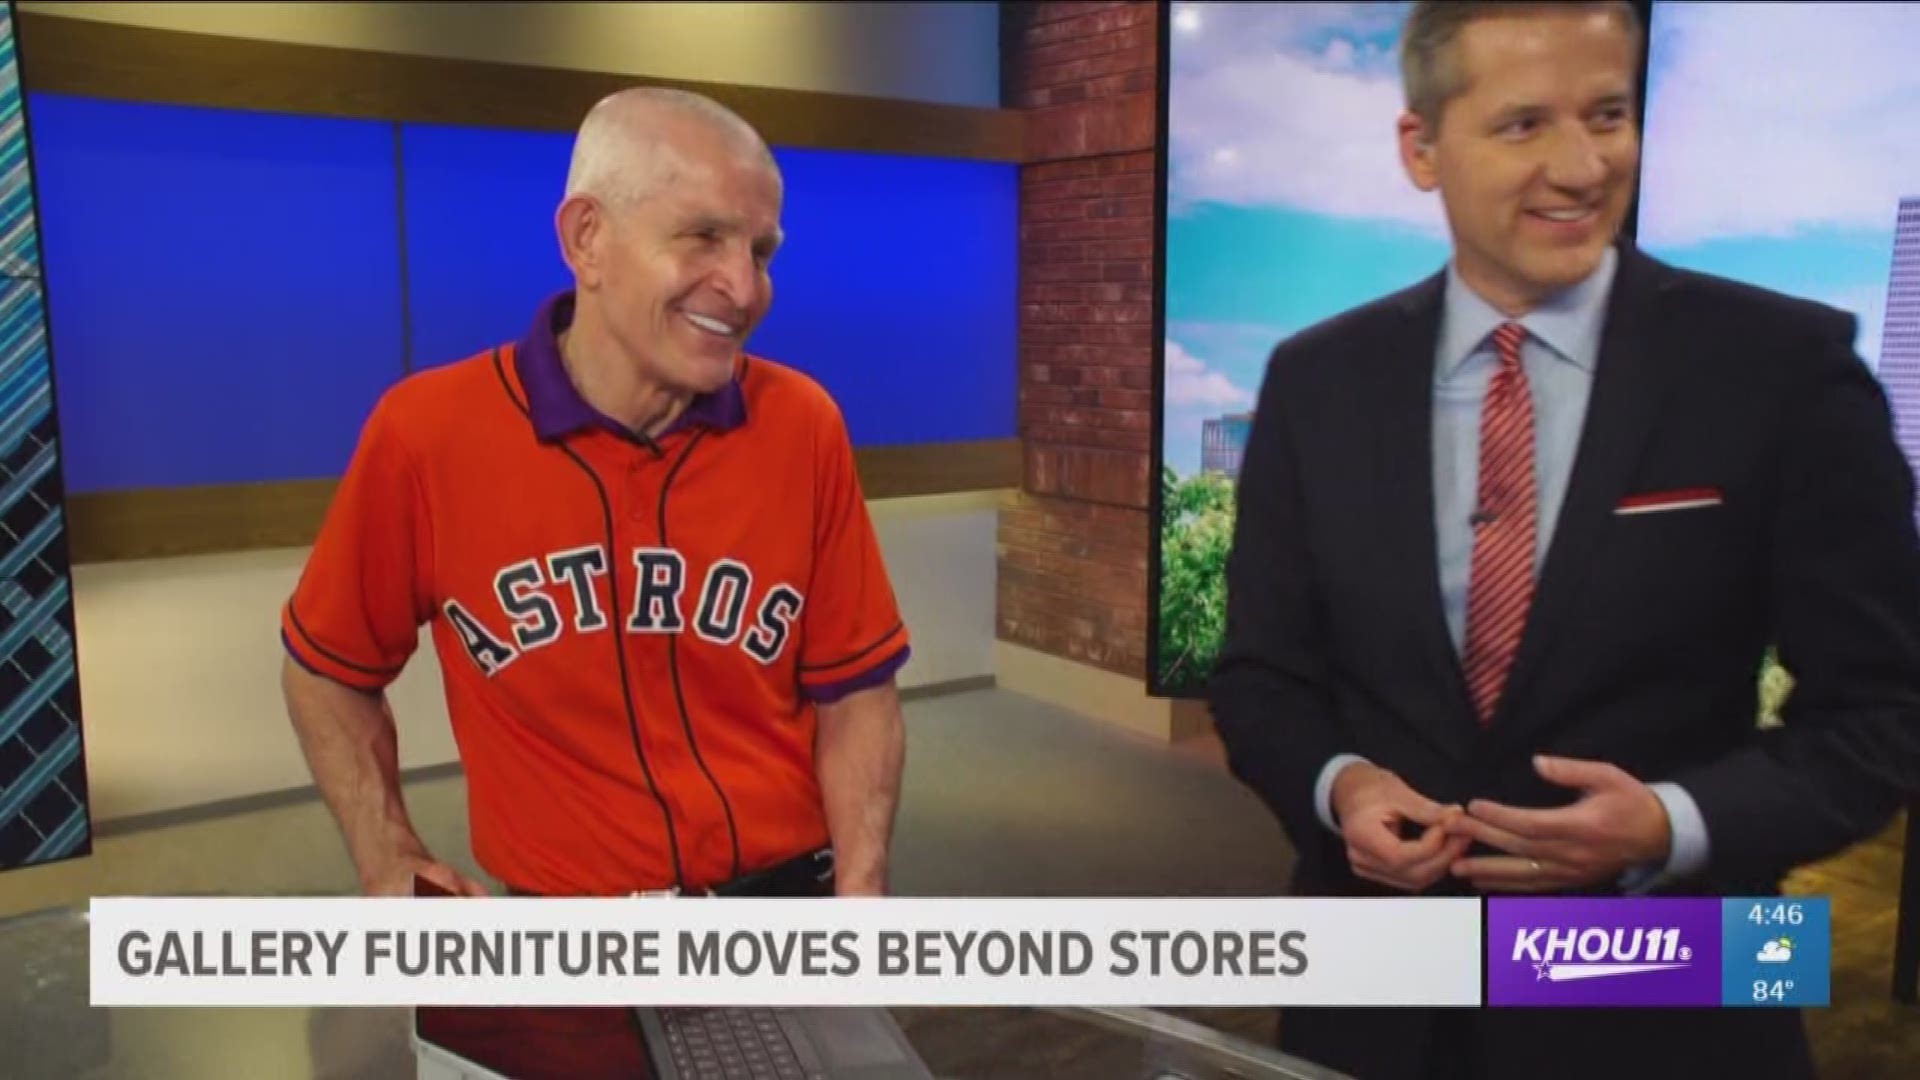 Mattress Mack talks to KHOU 11 anchor Jason Bristol and Shern-min Chow about converting portions of his stores into community centers. 